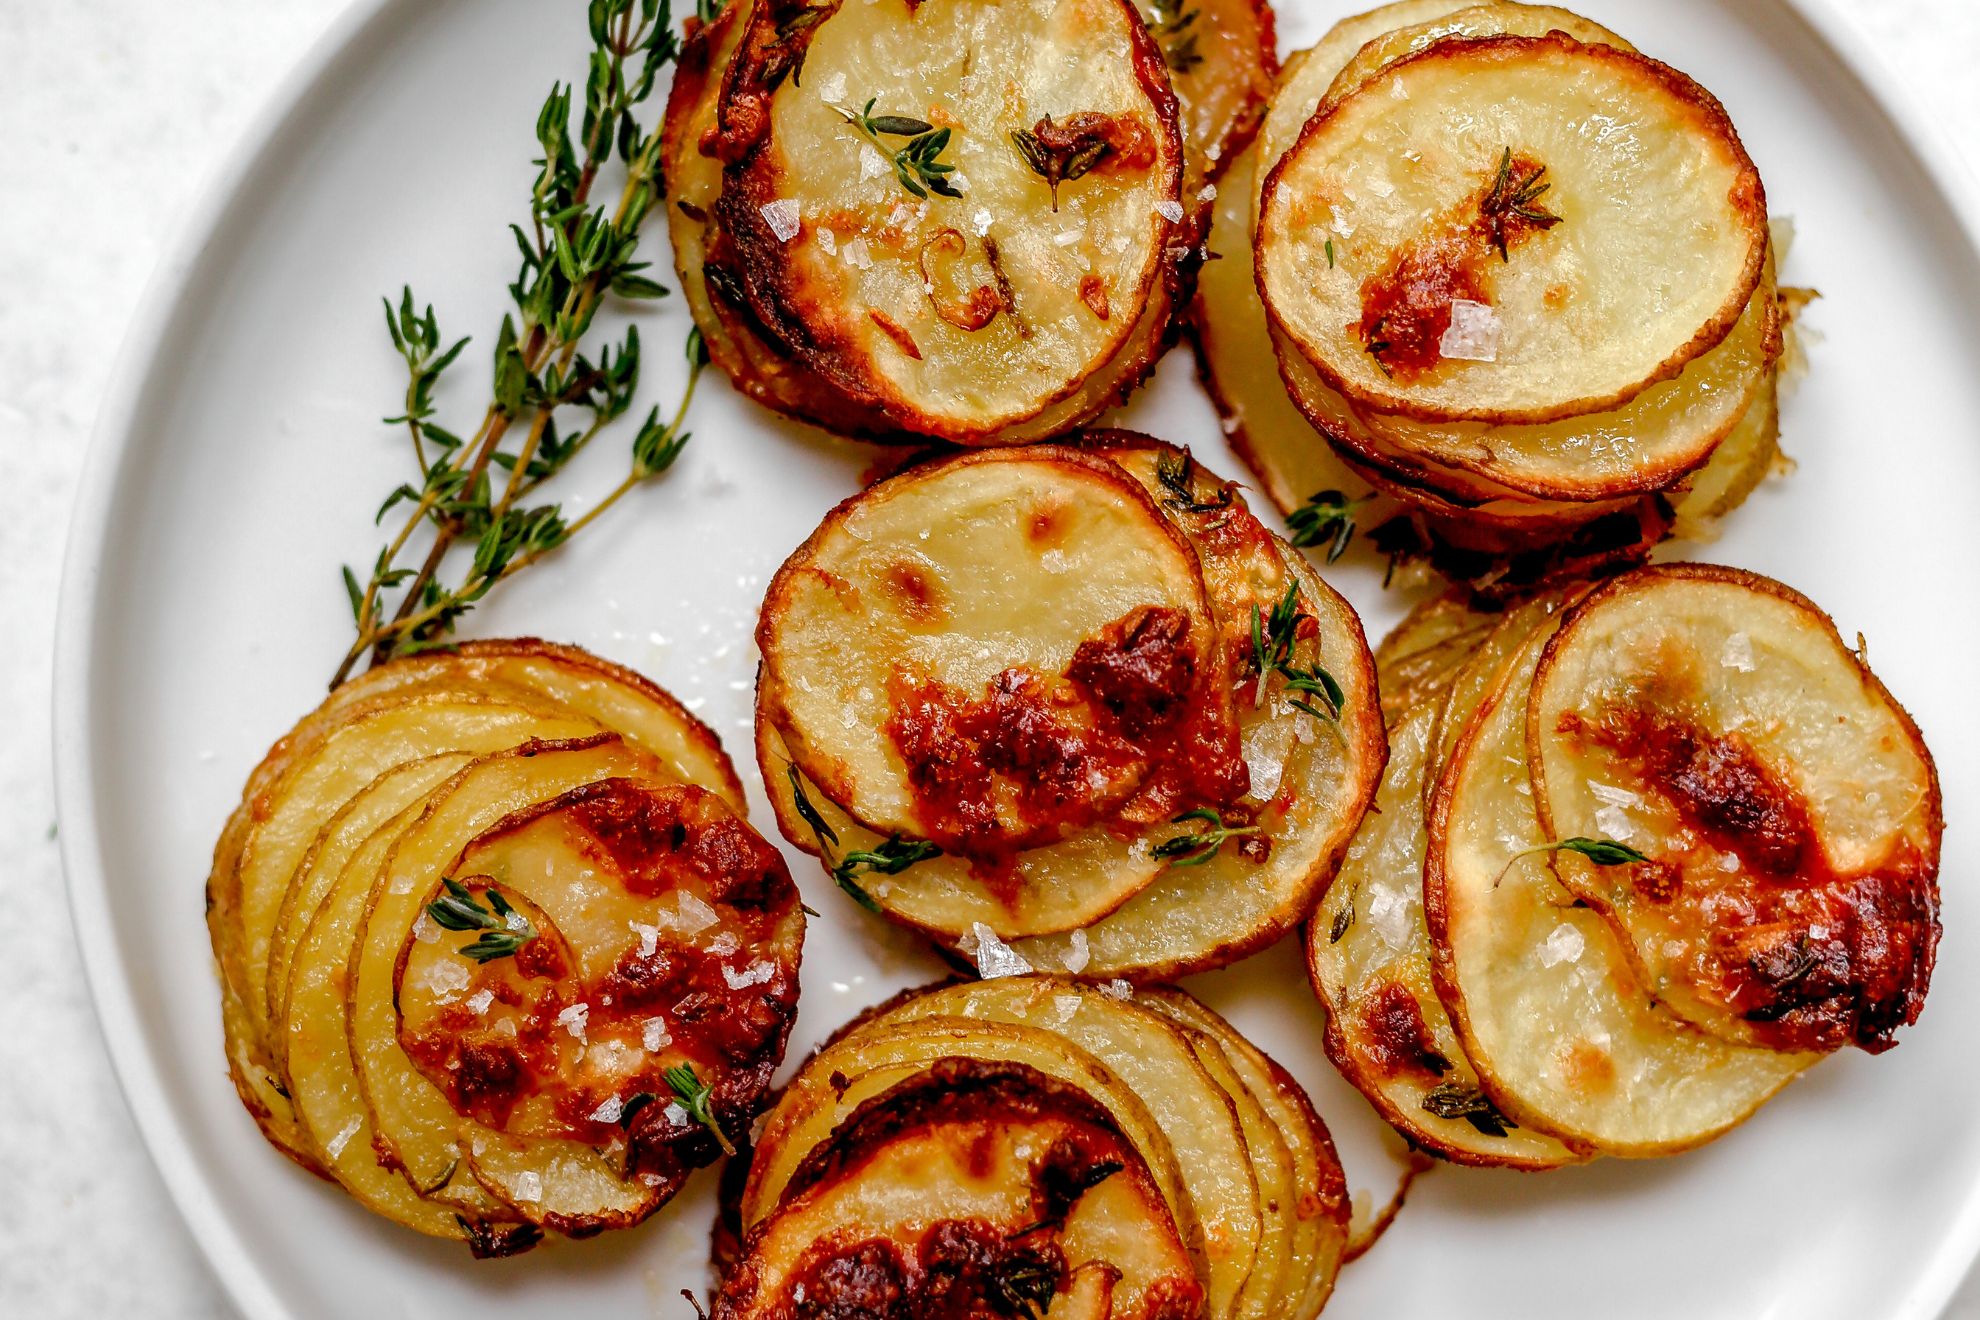 This is an overhead horizontal image of sliced stacked white potatoes. The potatoes have golden brown bubbles on them and are topped with flakey salt and fresh thyme leaves. The potato stacks are on a white plate on a white surface.